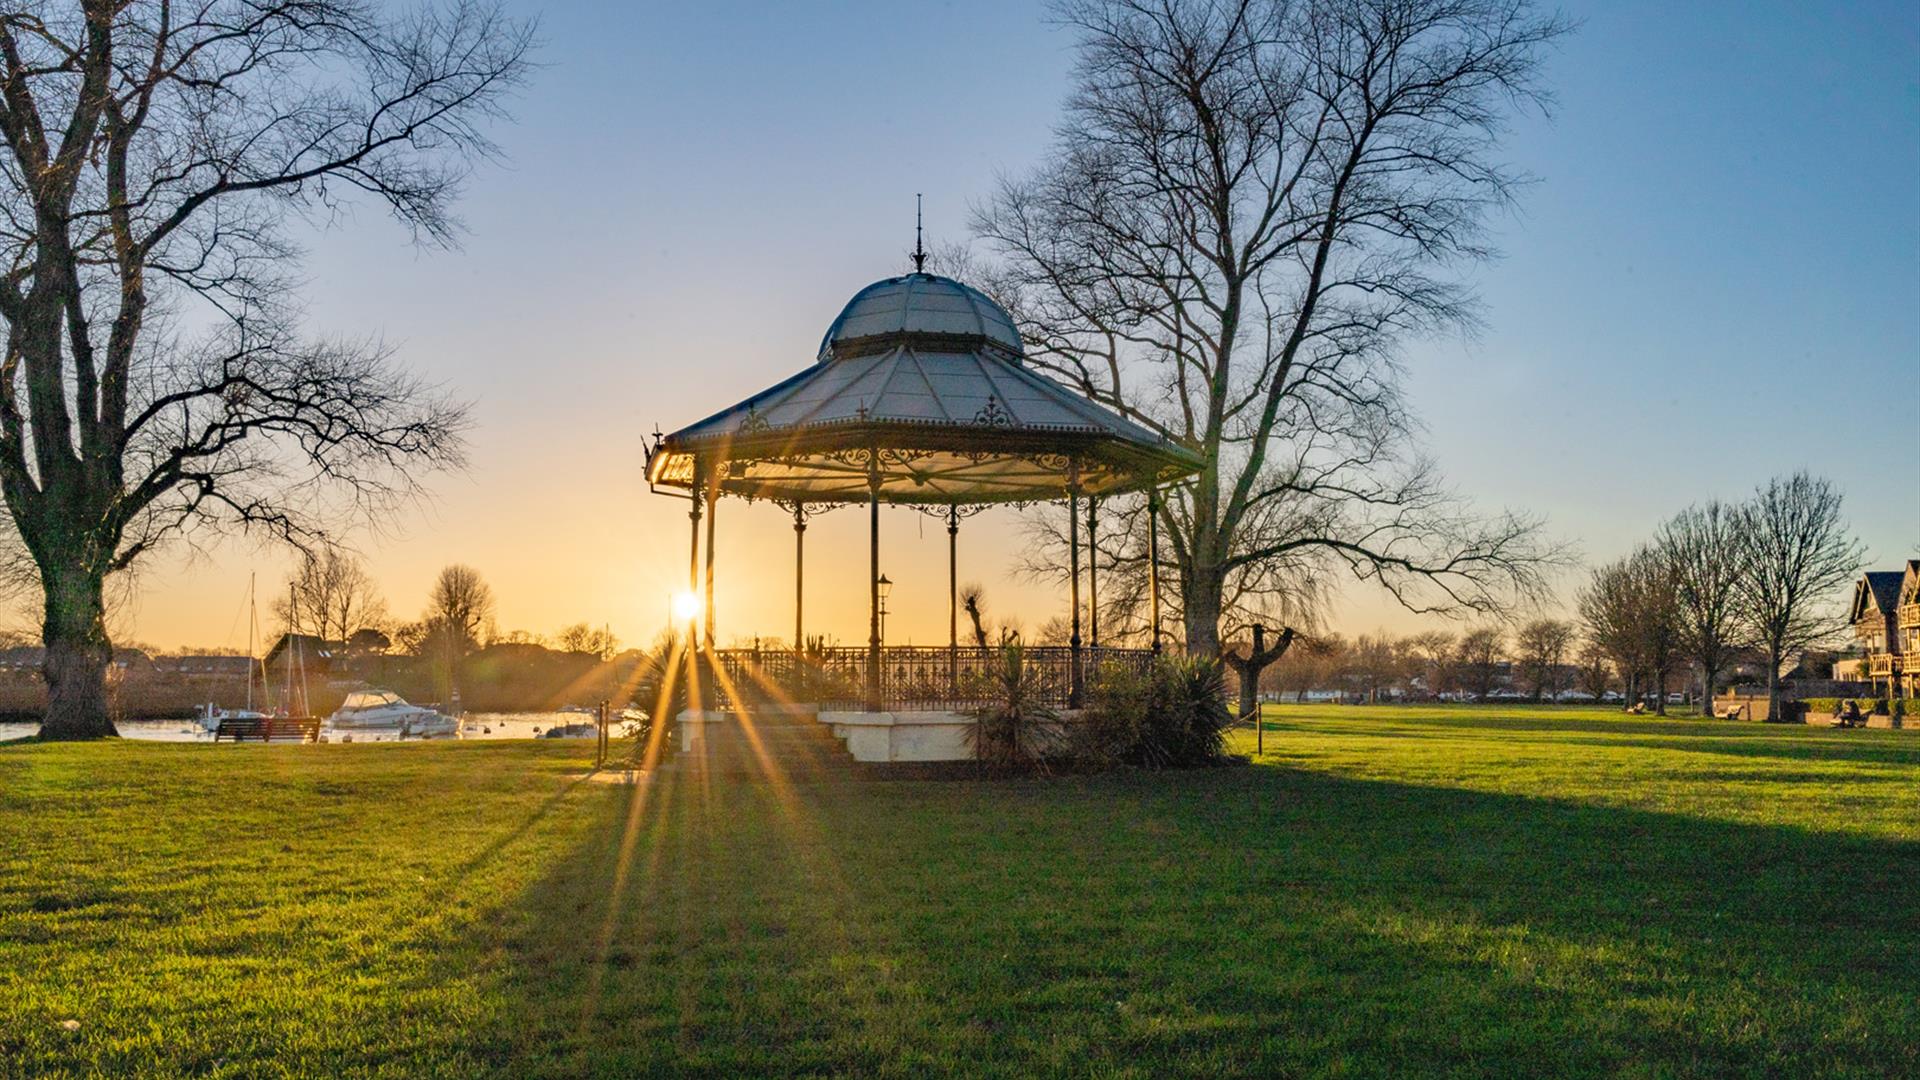 Sunsetting behind Christchurch bandstand on the quomps